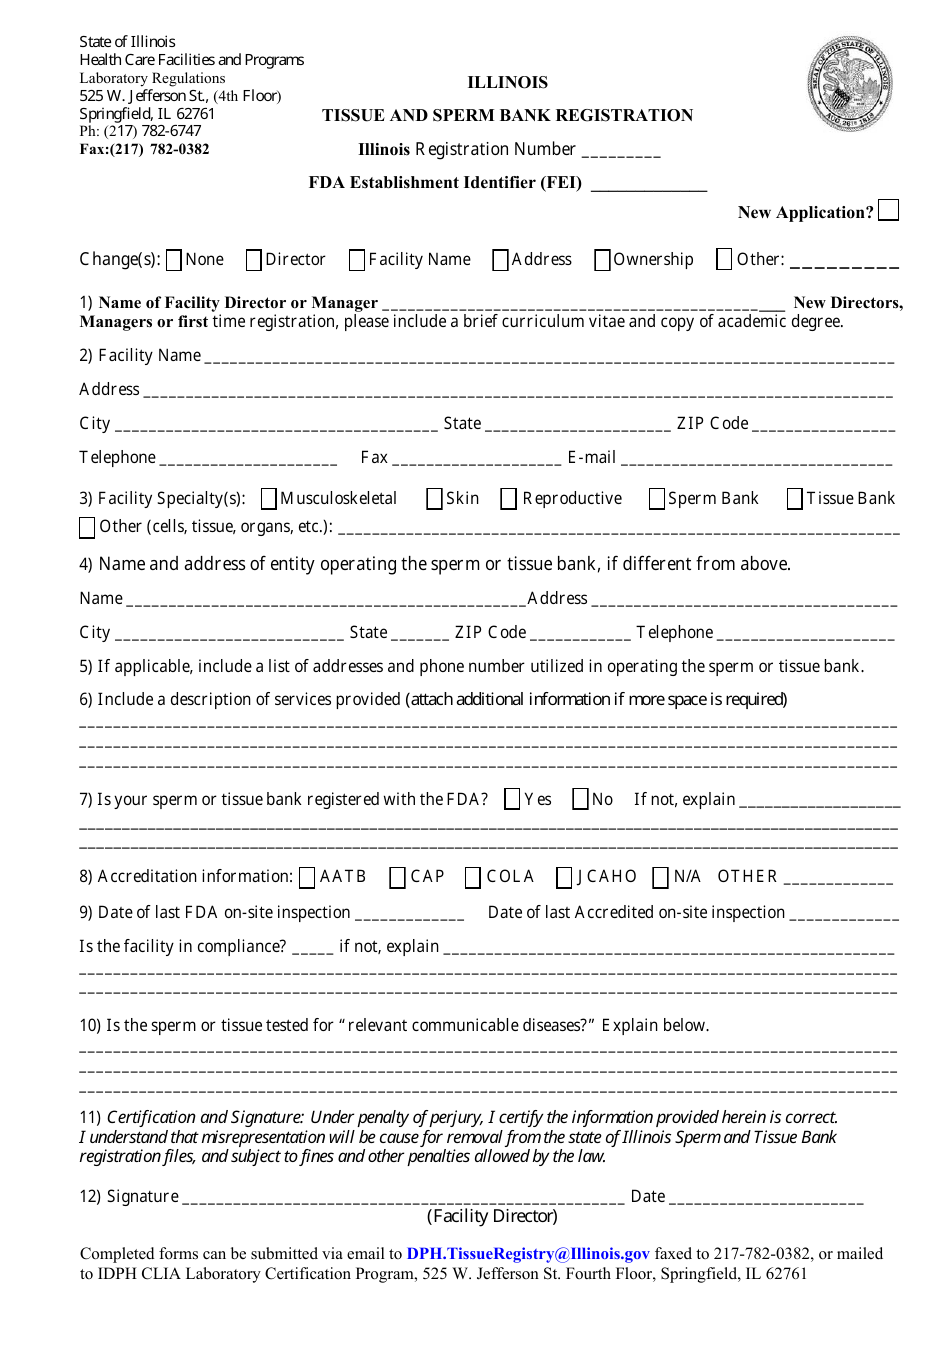 Tissue and Sperm Bank Registration - Illinois, Page 1